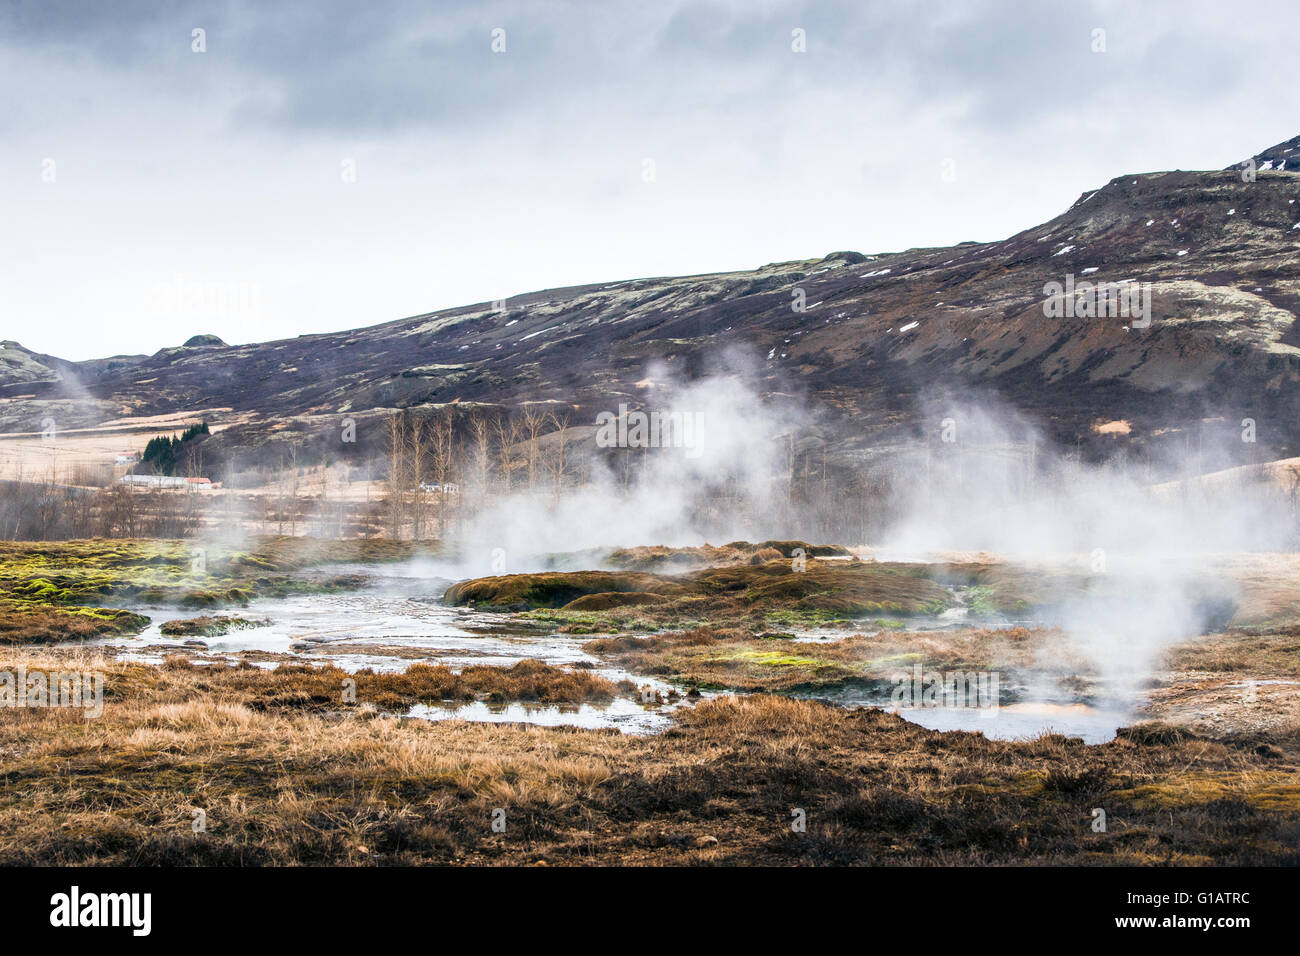 Misty swamp with geothermal activity beneath a mountain in Iceland Stock Photo